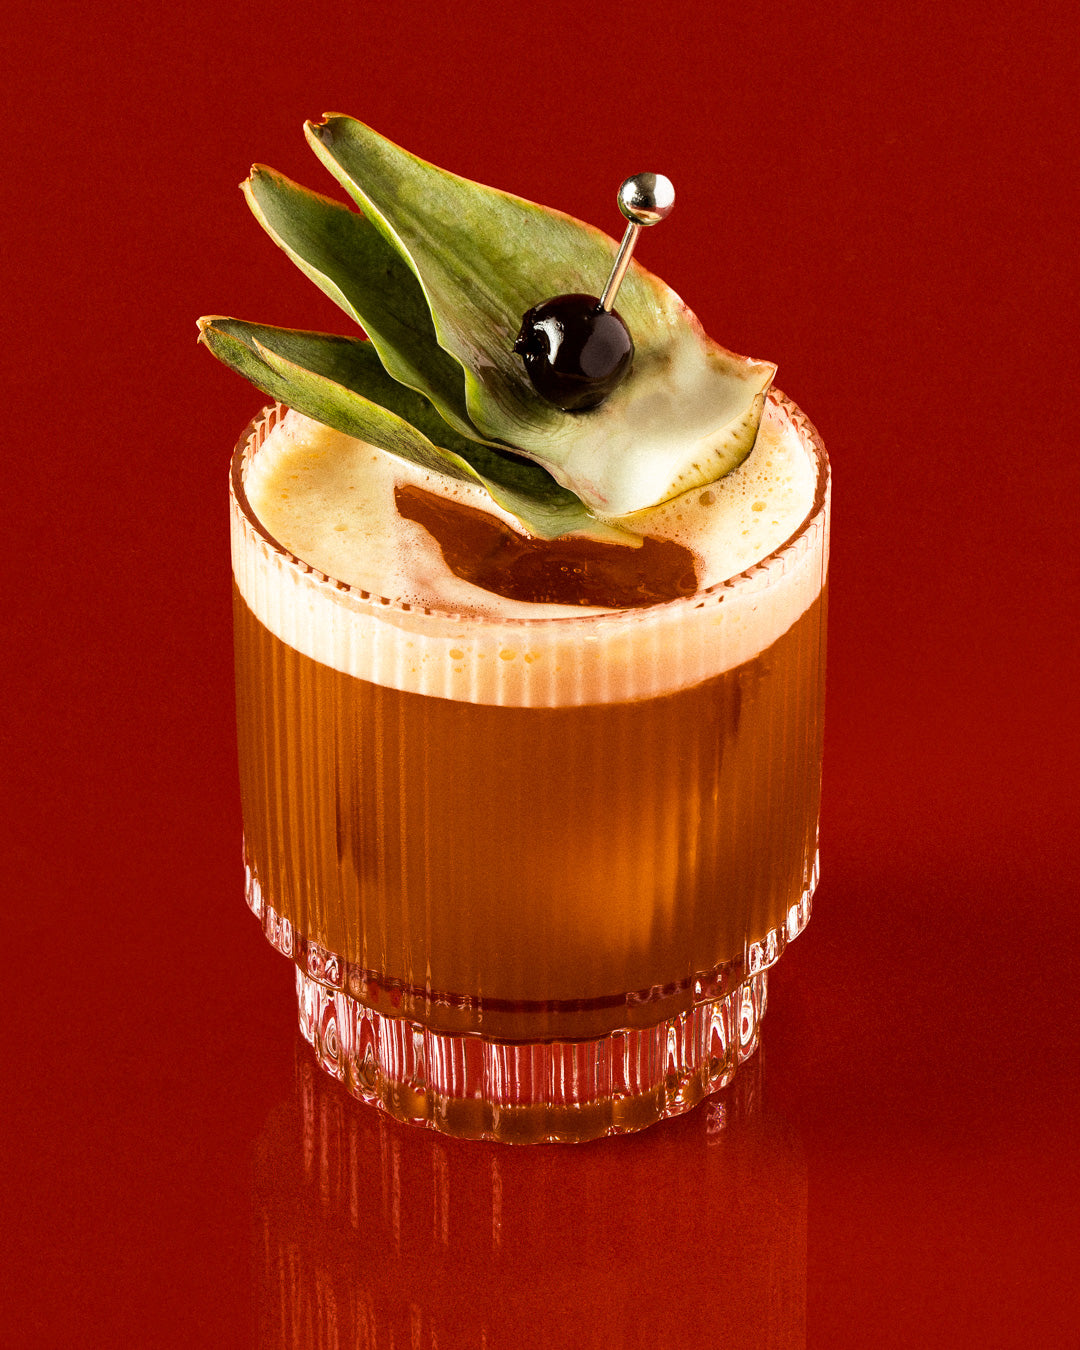 Cocktail glass with pineapple leaves, dark cherry and foam on glossy red background